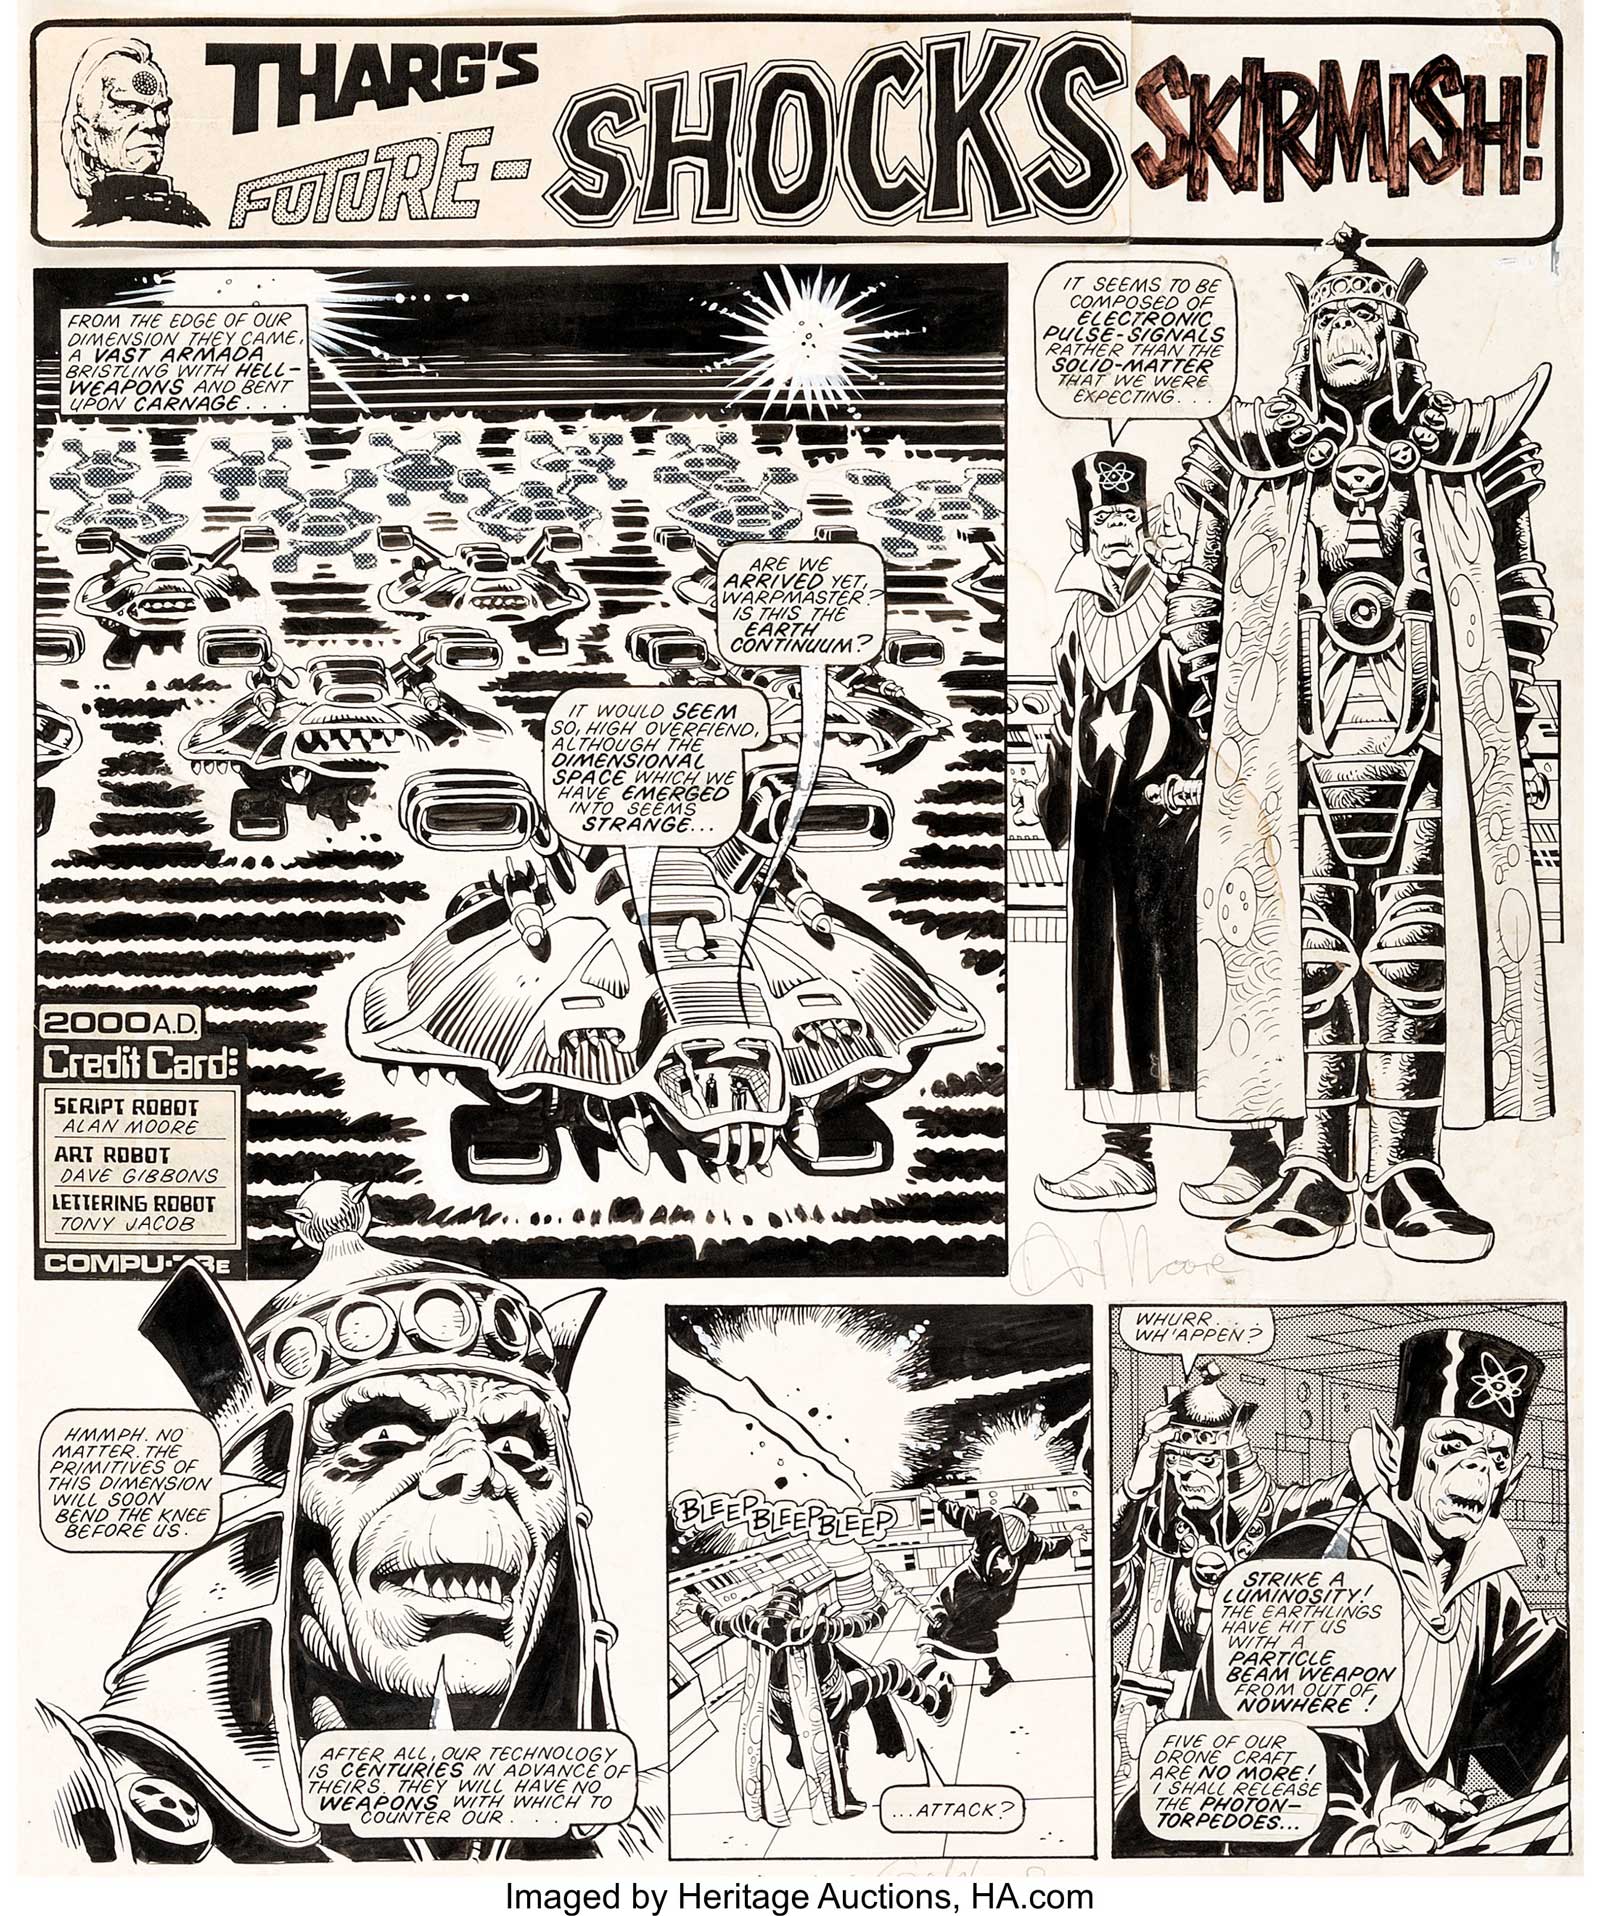 Dave Gibbons 2000 AD #267 Complete 2-Page Story "Skirmish!" Original Art (IPC, 1982)